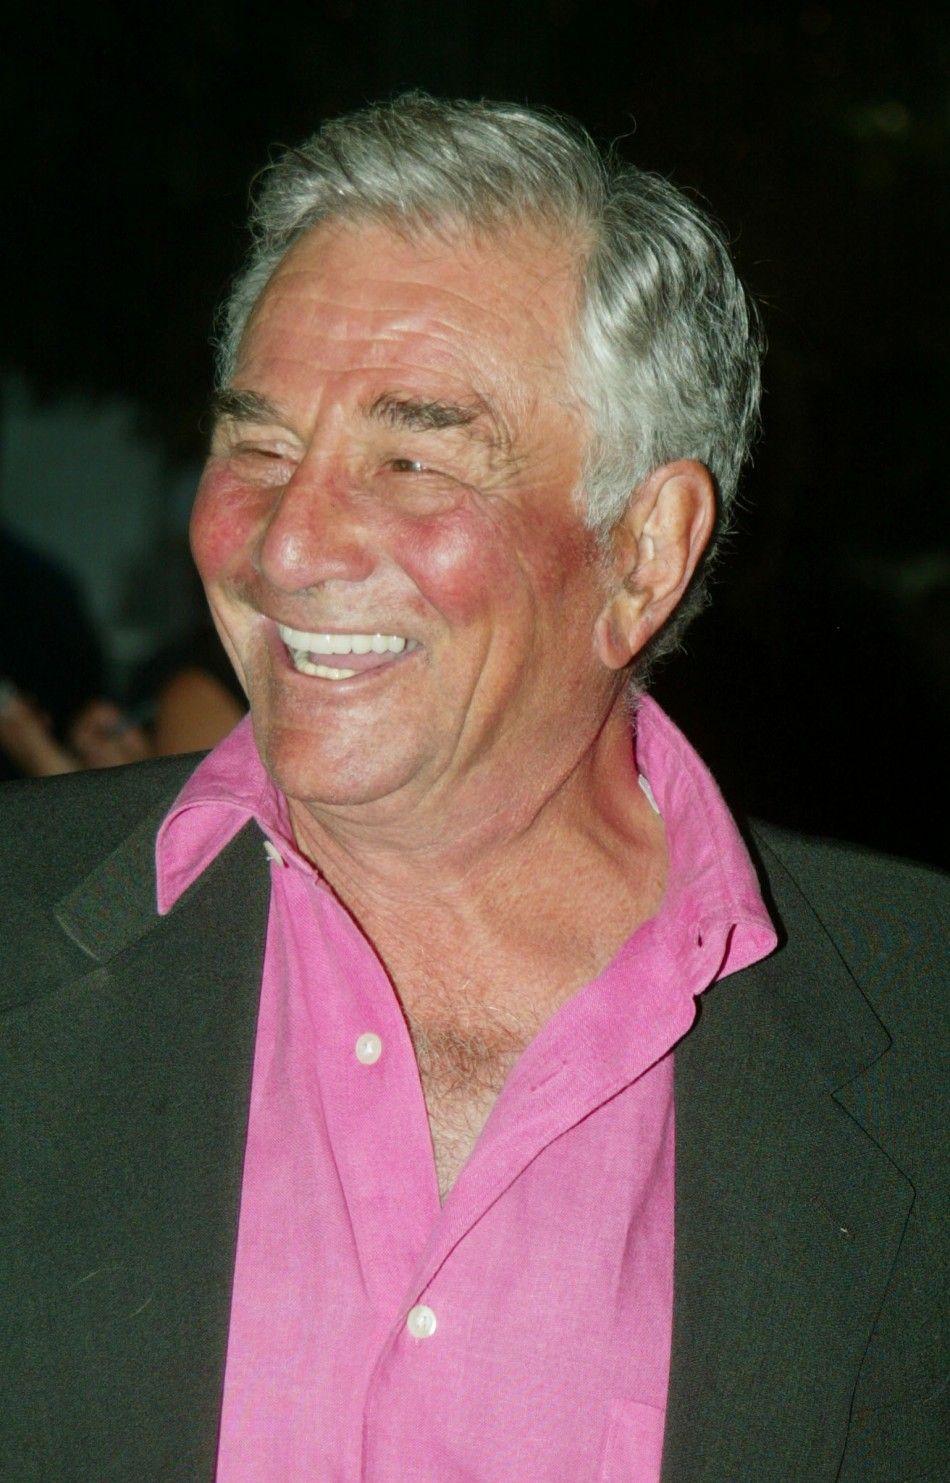 Actor Peter Falk arrives as a guest at the Filmmakers Alliance 5th anniversary gala in Los Angeles August 14, 2002. German film director Wim Wenders was honored with the Alliance039s third annual Vision Award.